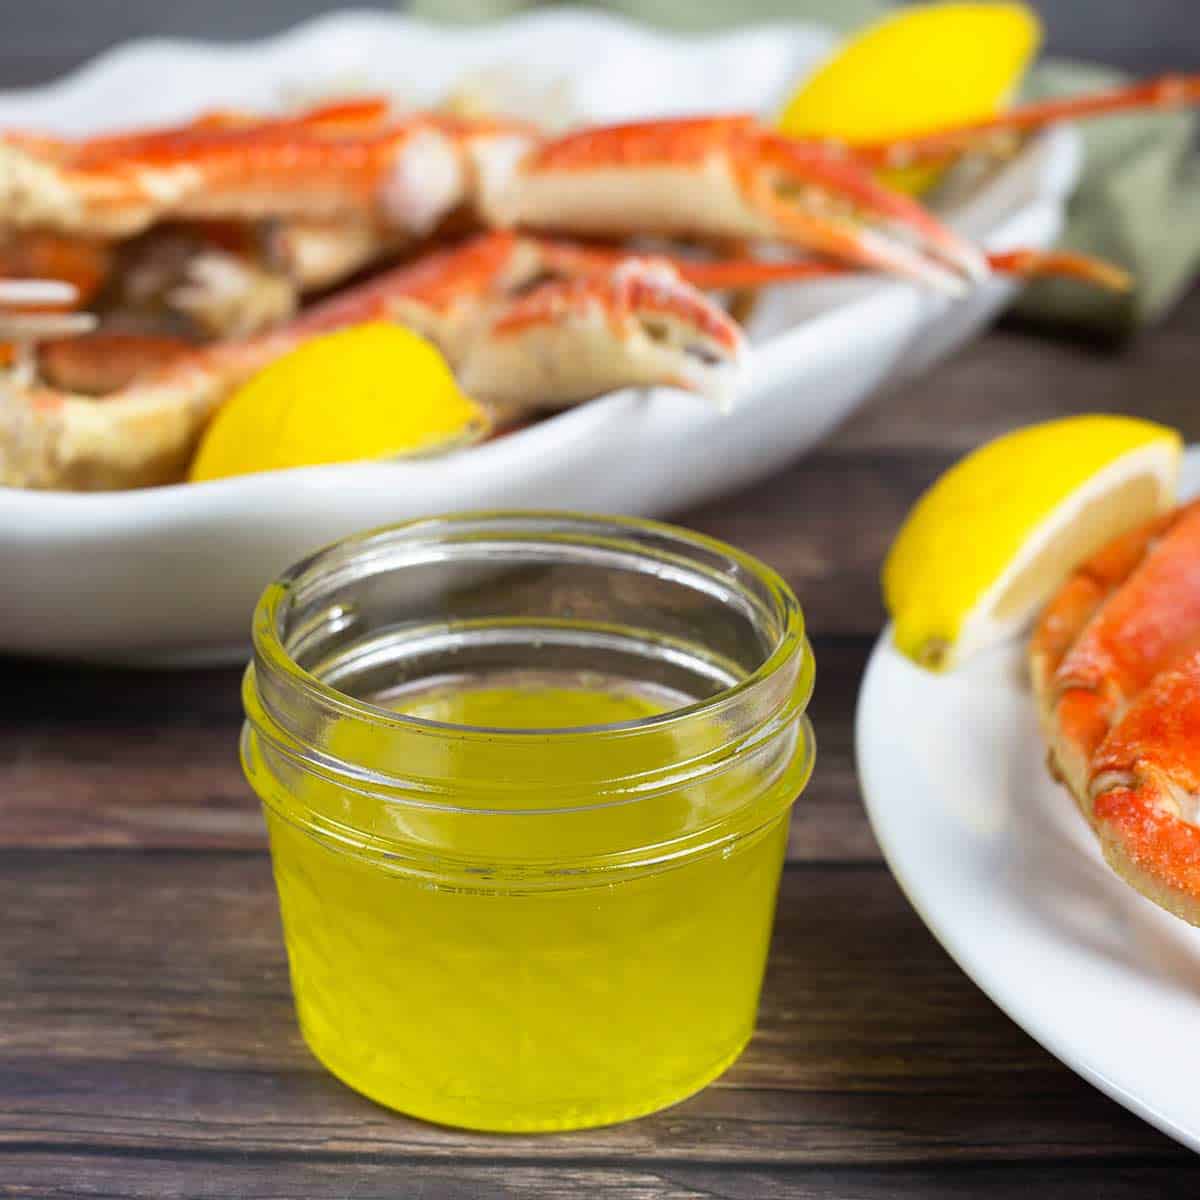 clarified butter in a small jar next to steamed crab legs.